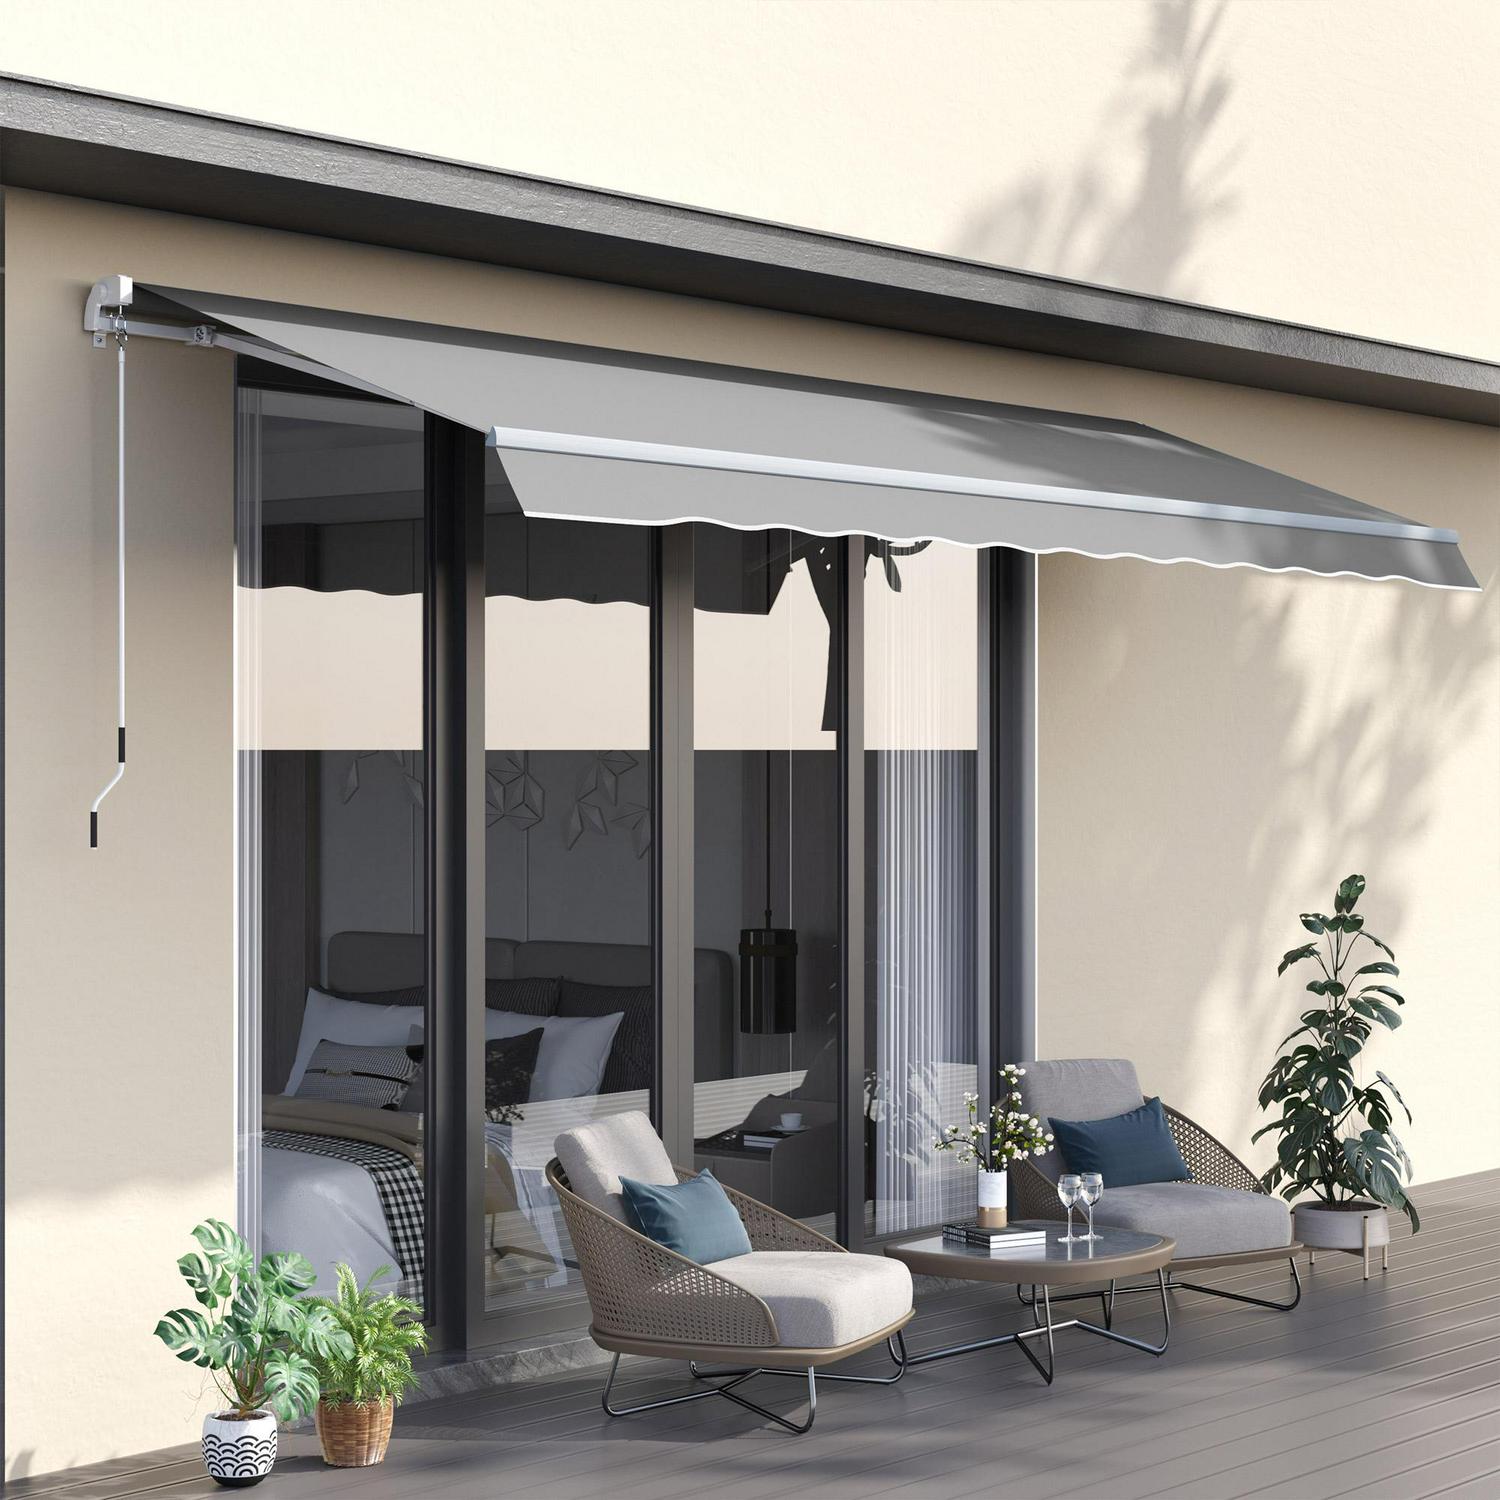 3 X 2m Awning Canopy Manual Retractable Porch Sun Shade Shelter Light Grey